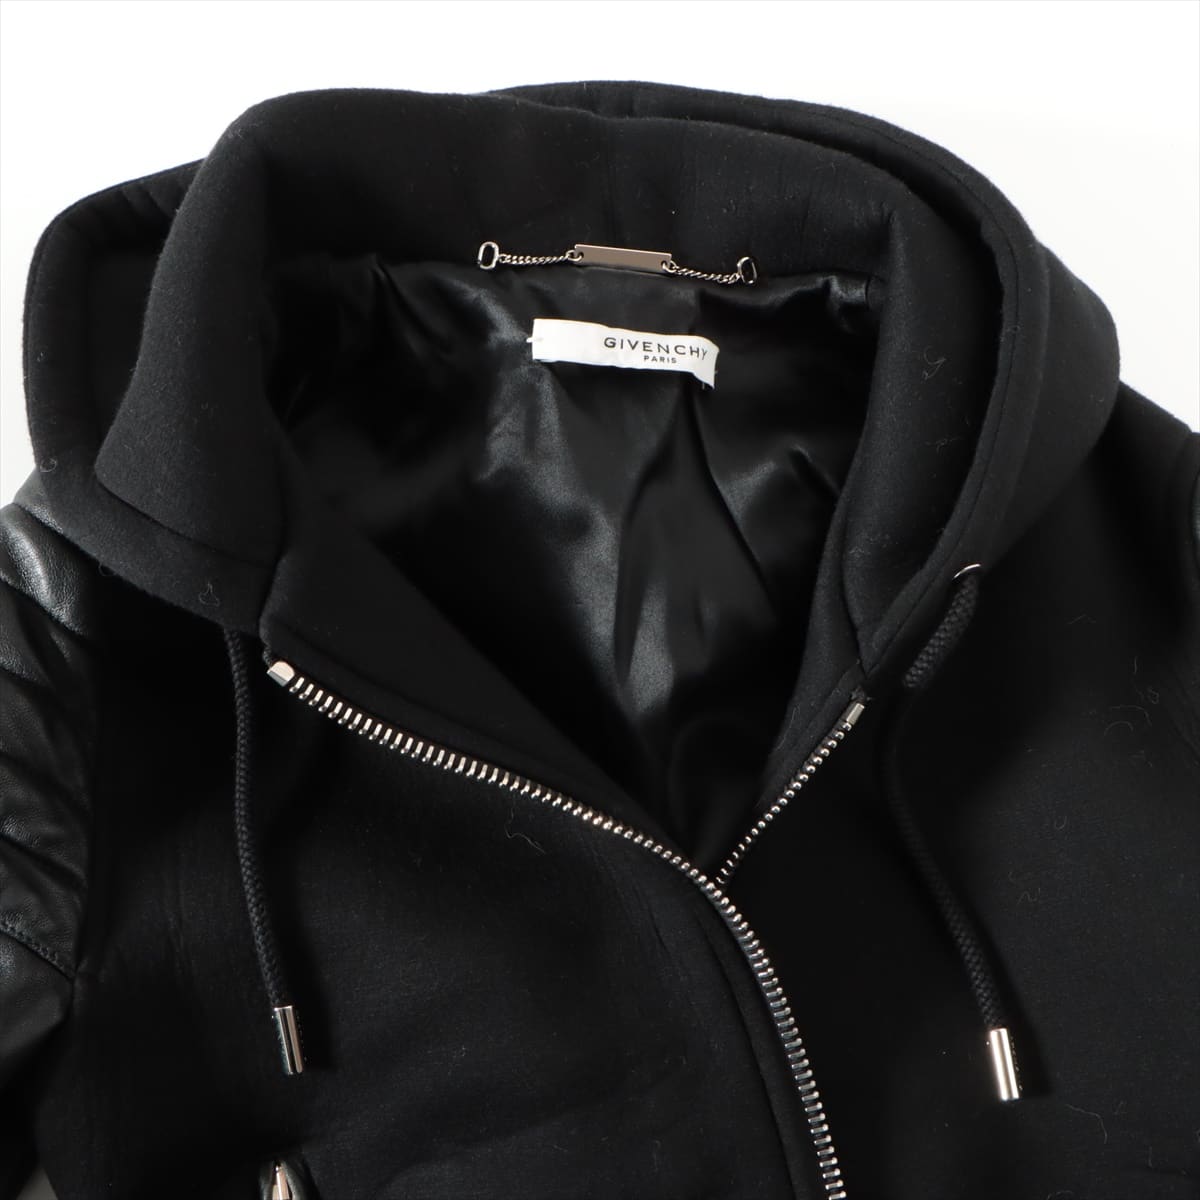 Givenchy Rayon Jacket 34 Ladies' Black  Neo Puren Switch between arm ram leather